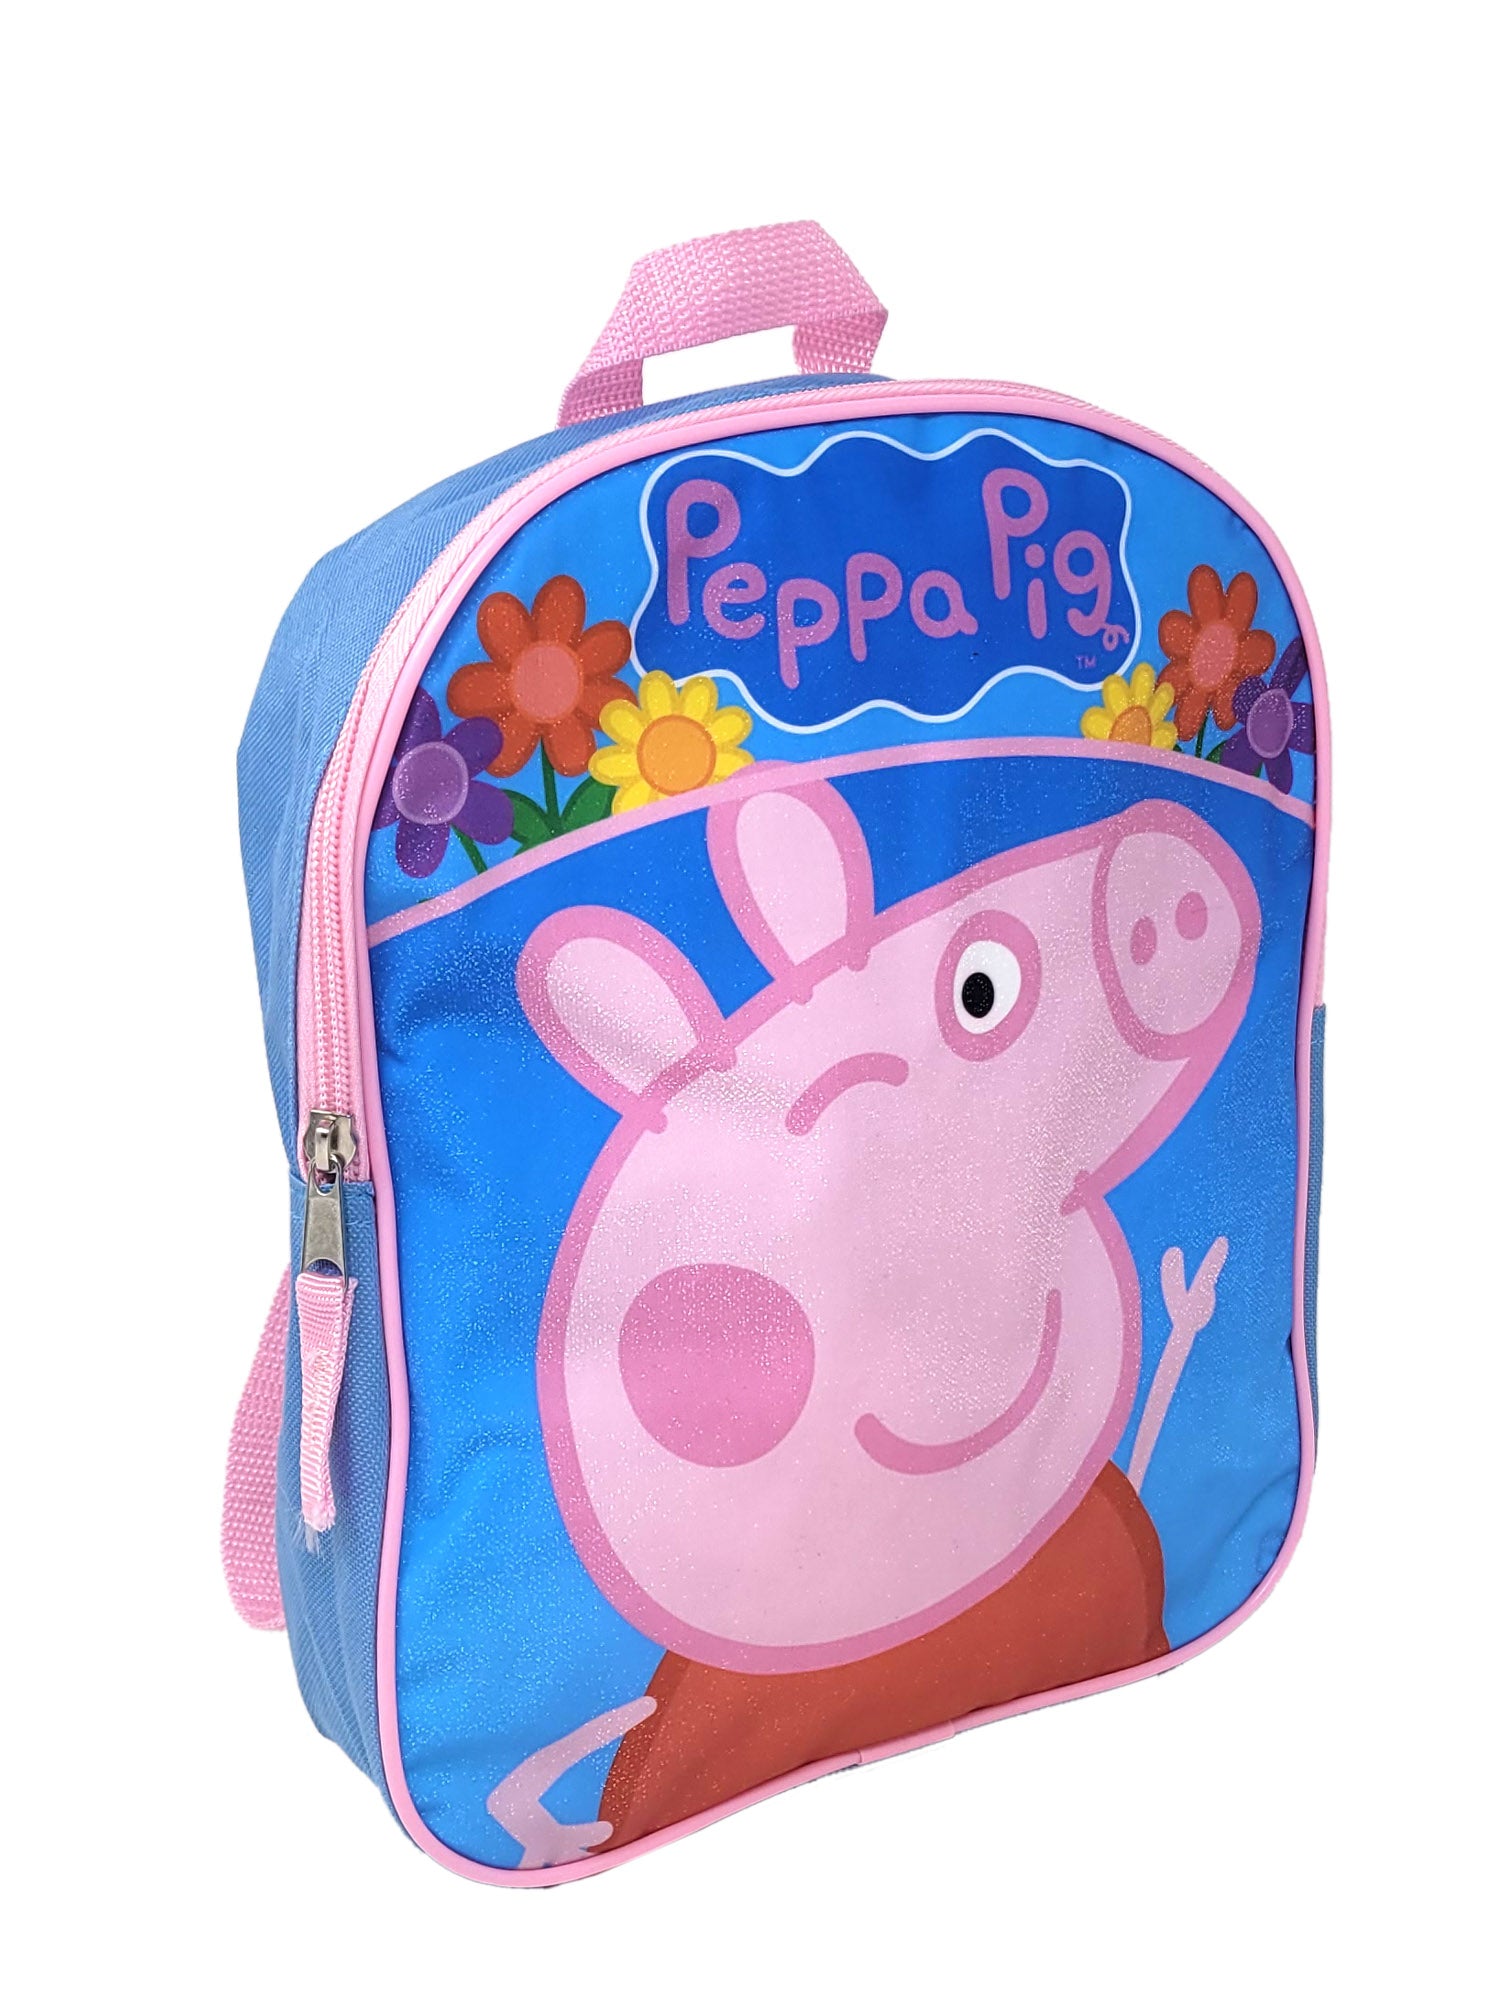 Girls Peppa Pig Small Mini Backpack 11"  Smiles and Flowers